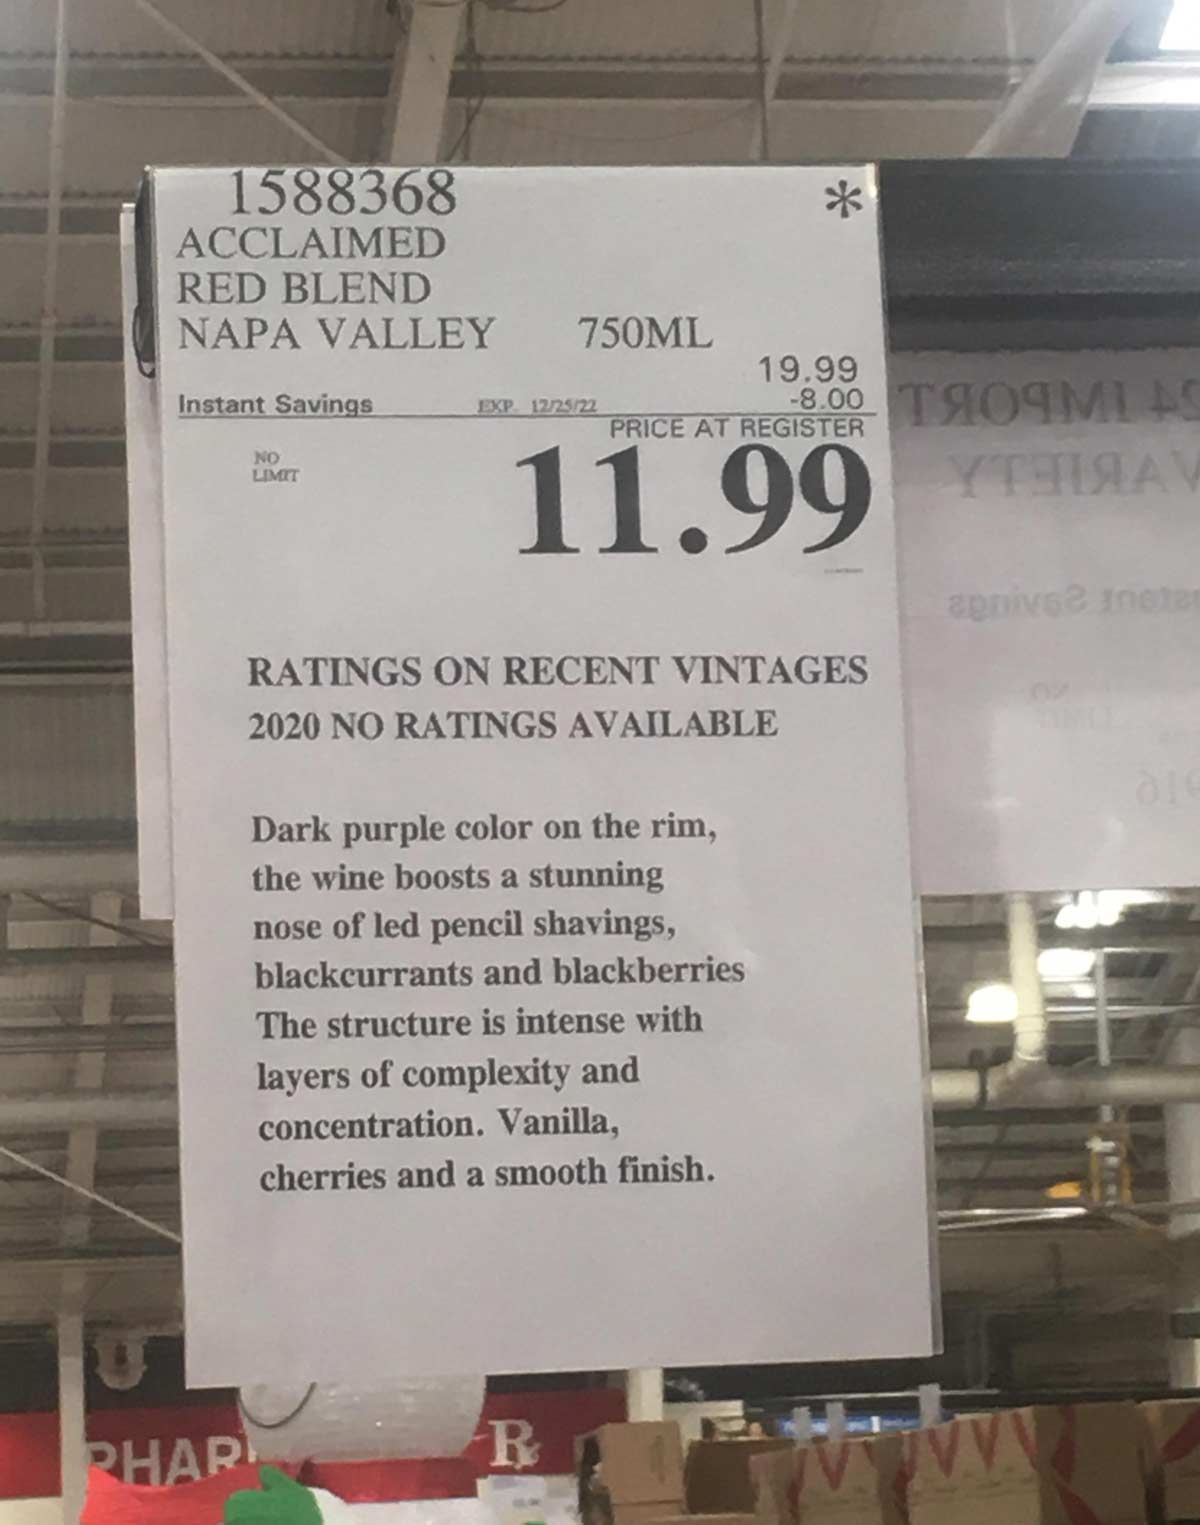 At my local Costco. I’ve never heard wine described as A stunning nose of led pencil shavings